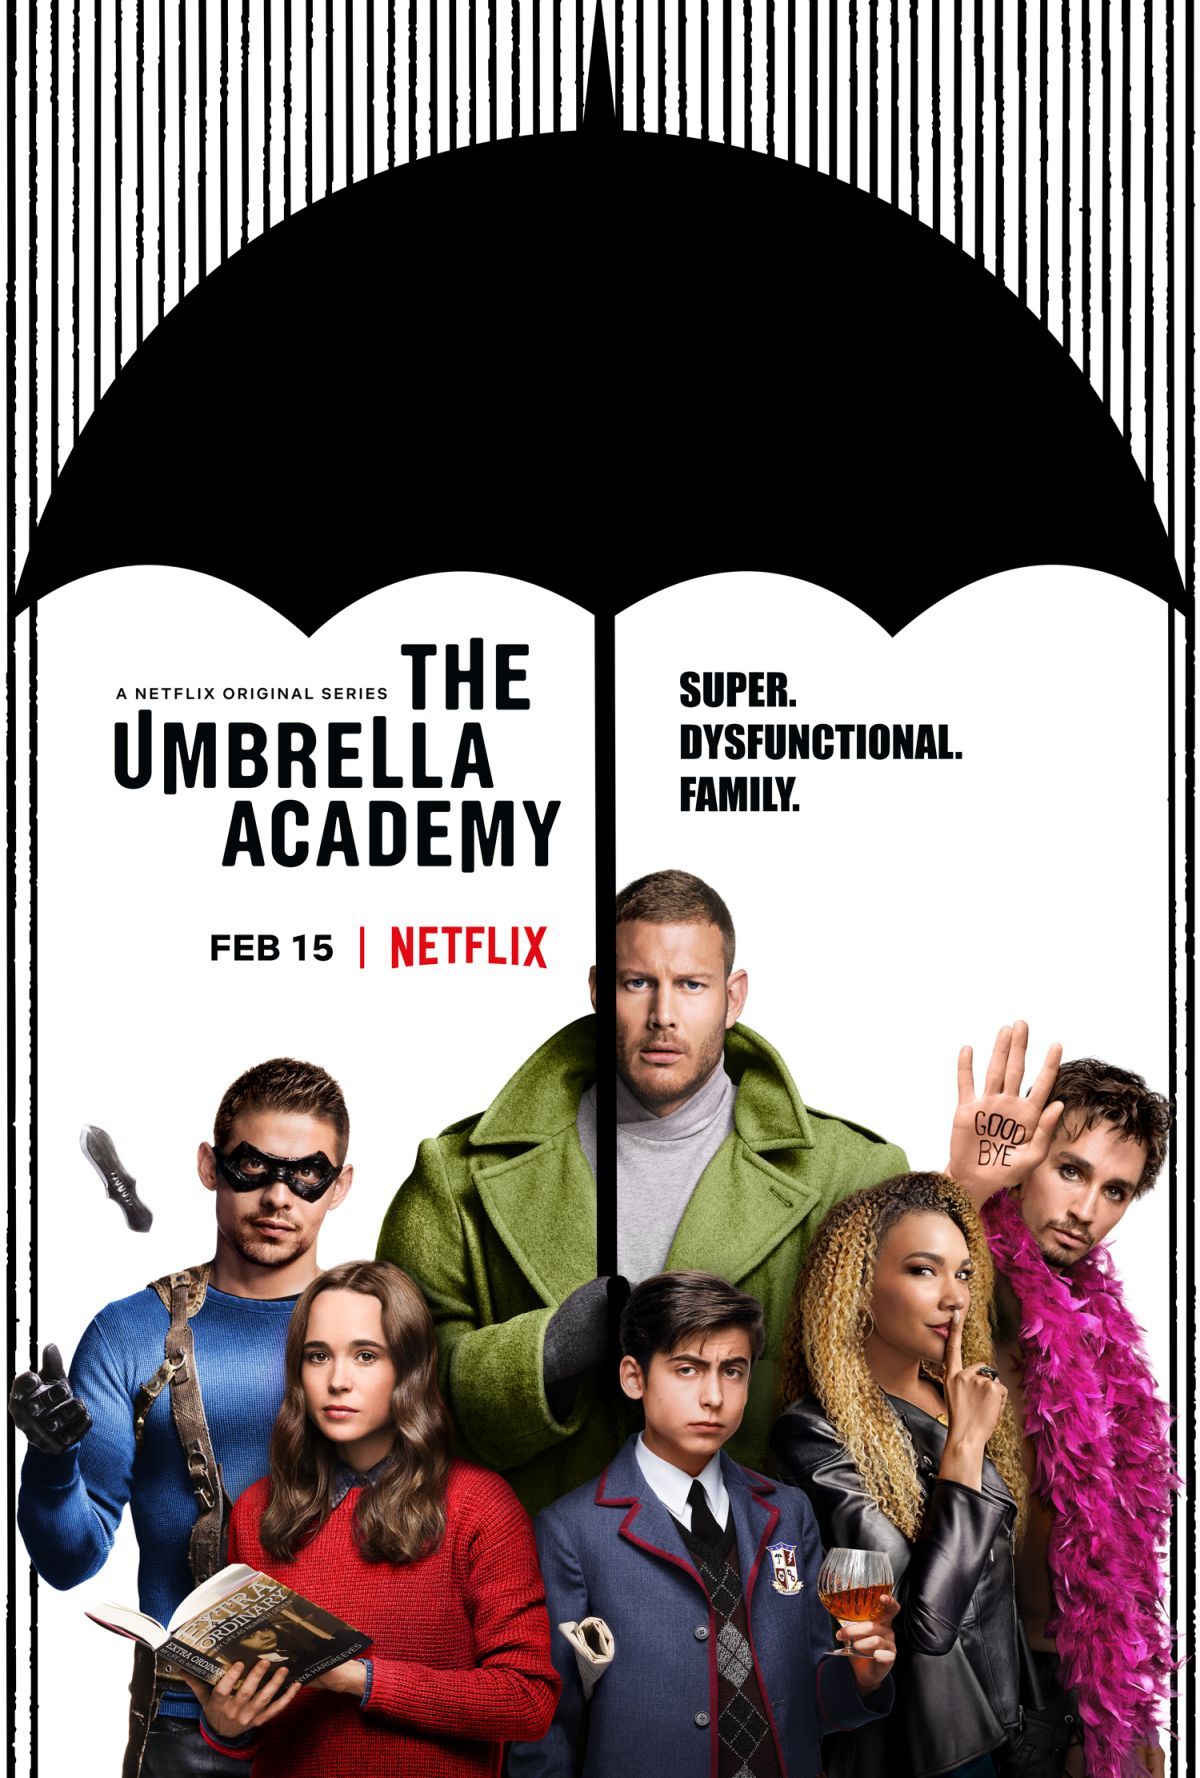 Premiere: Jeff Russo “Hazel and Delores” From The Umbrella Academy Soundtrack ...